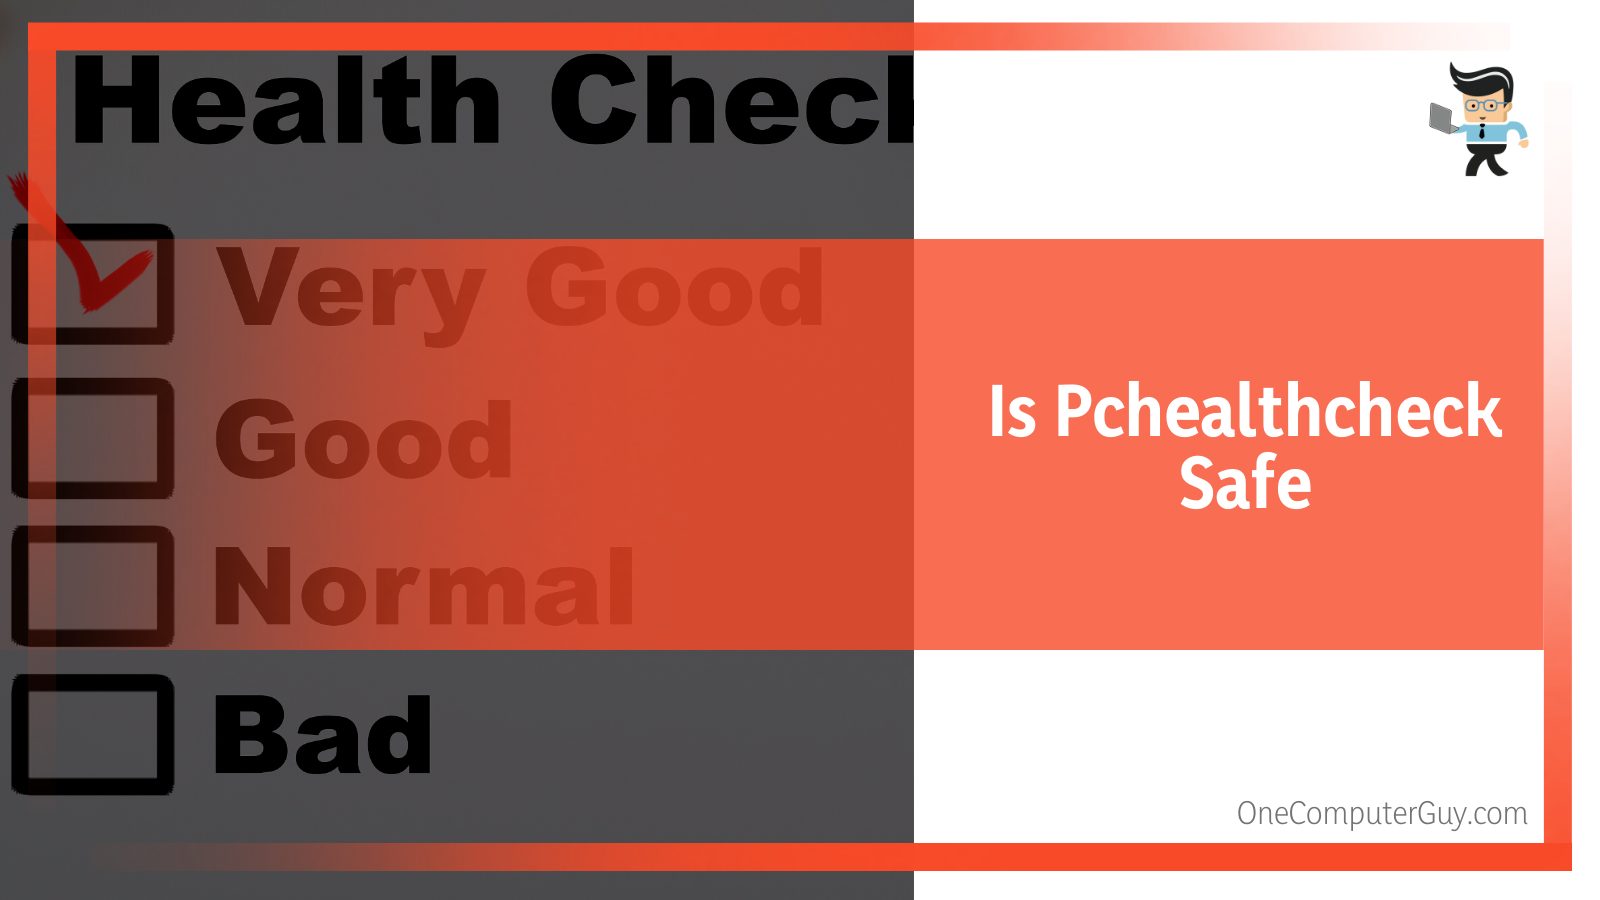 How safe is PC healthcheck tools